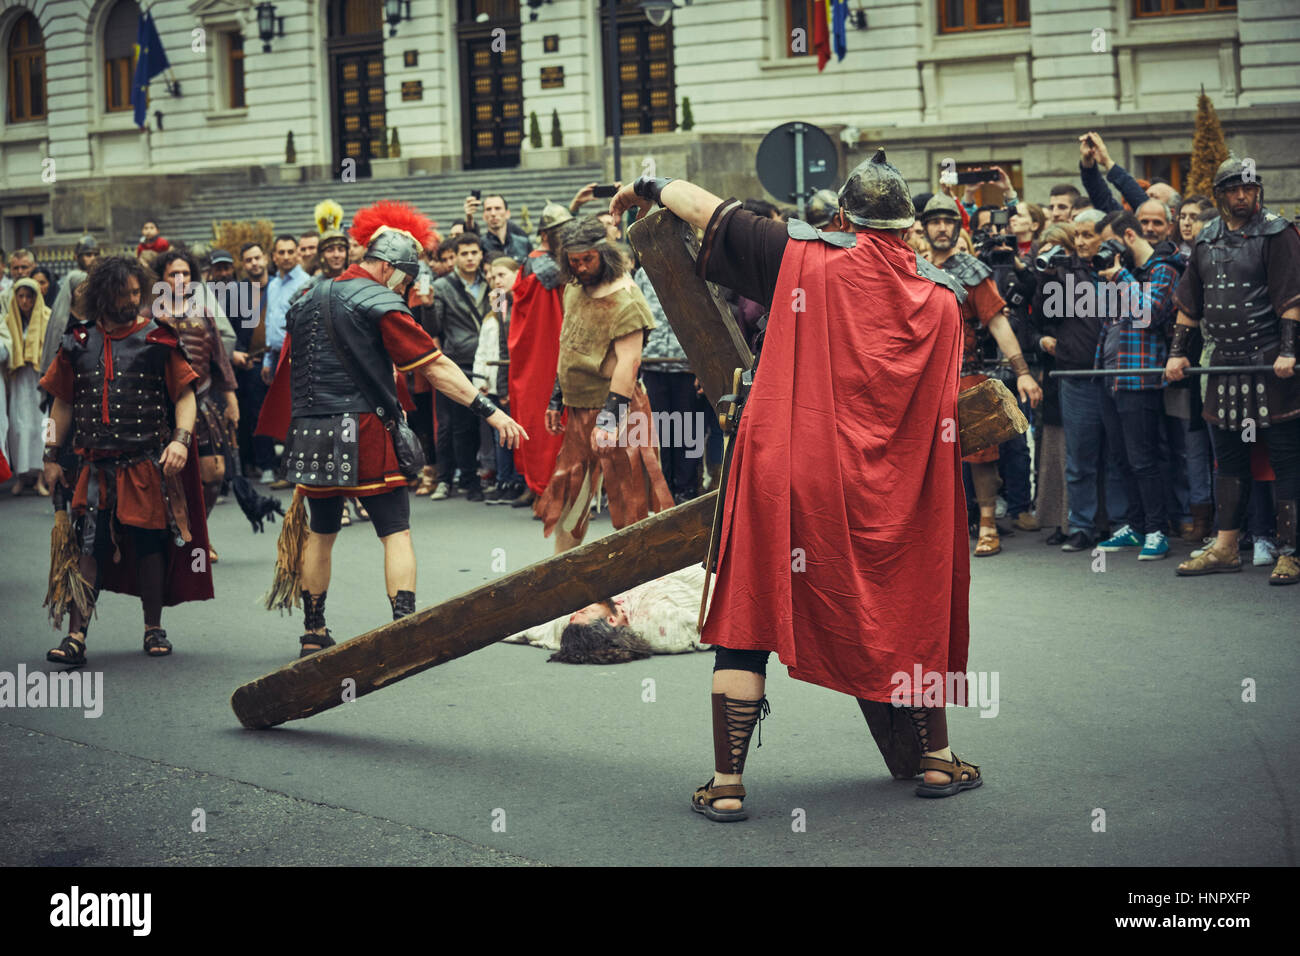 Romanian actors reenact the path of Jesus Christ along the Stations of the Cross on Good Friday, April 15, 2014, downtown Bucharest, Romania Stock Photo